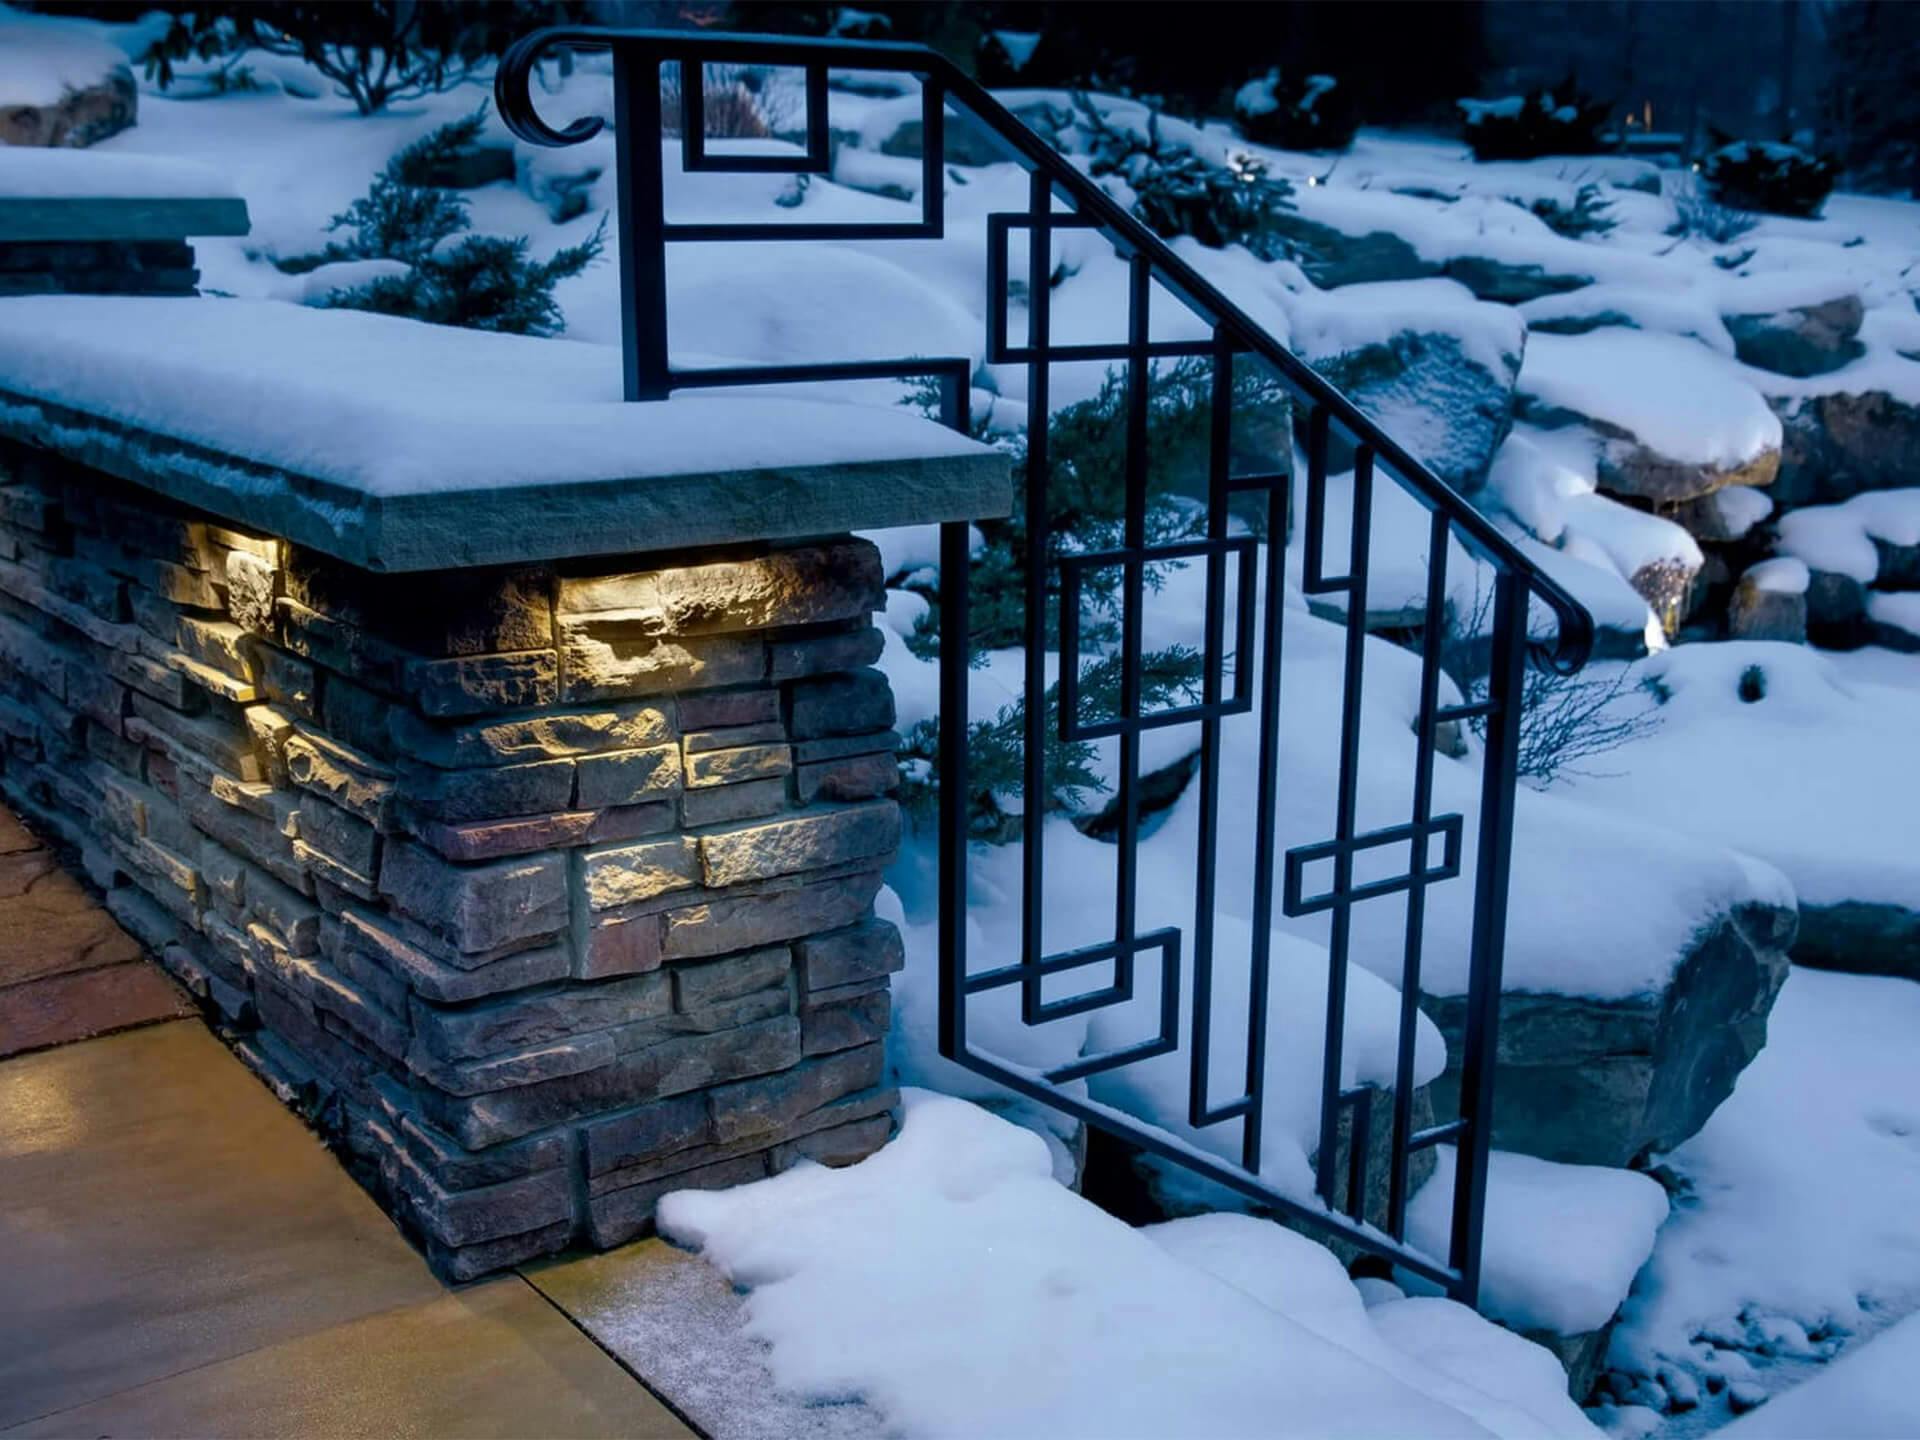 Snowy back yard focusing on patio stairs with downlights